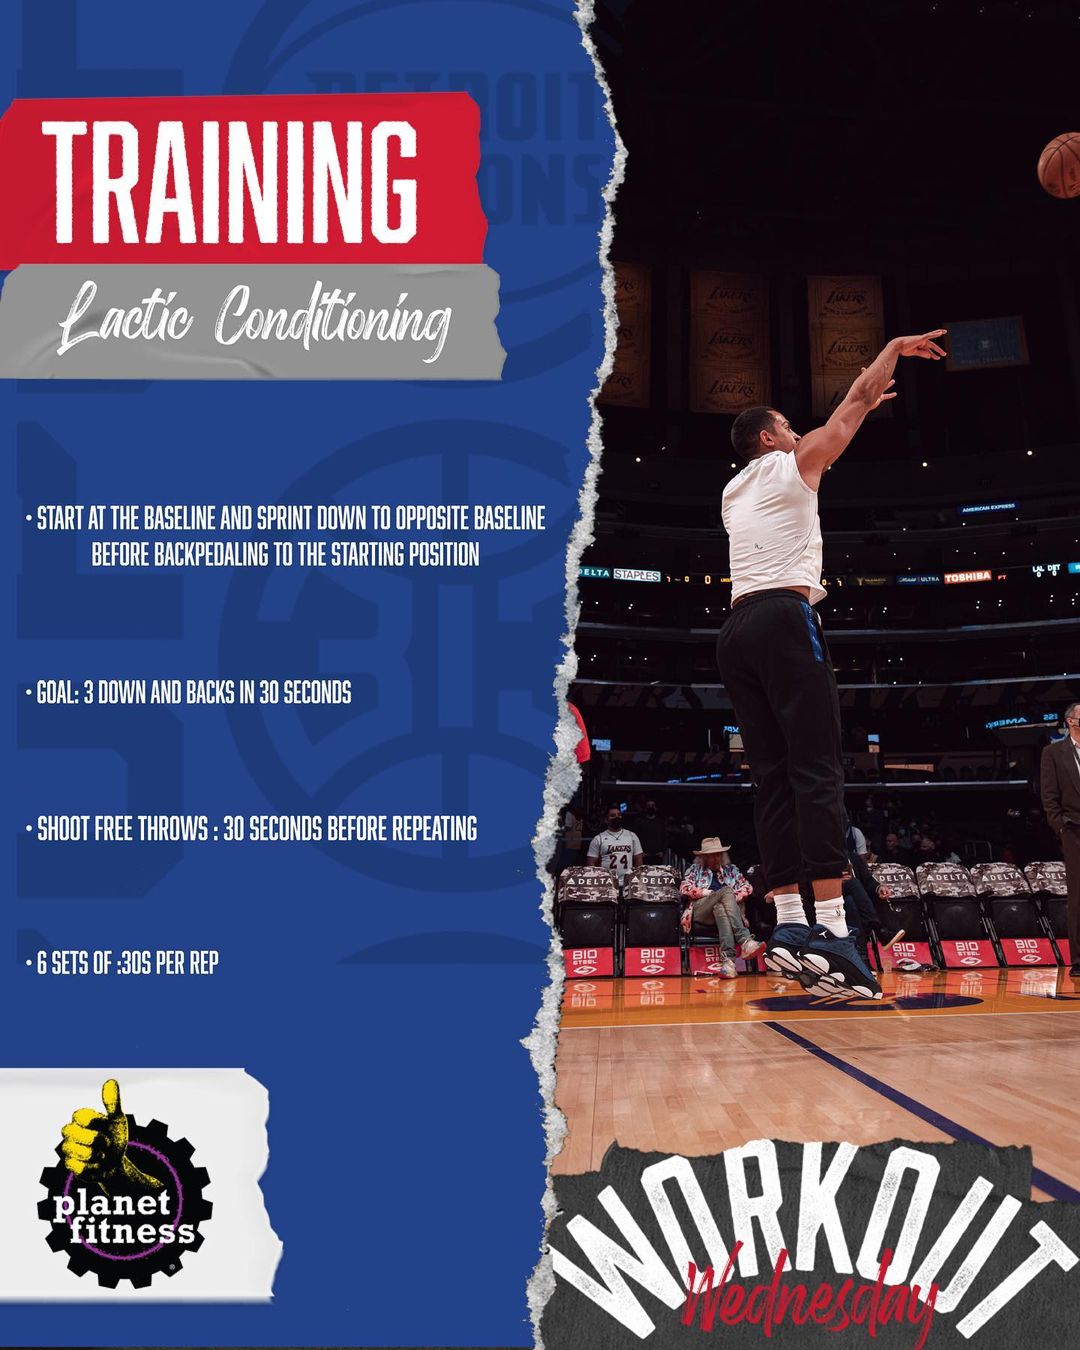 One time for #WorkoutWednesday!  Check out these steps on lactic conditioning a...